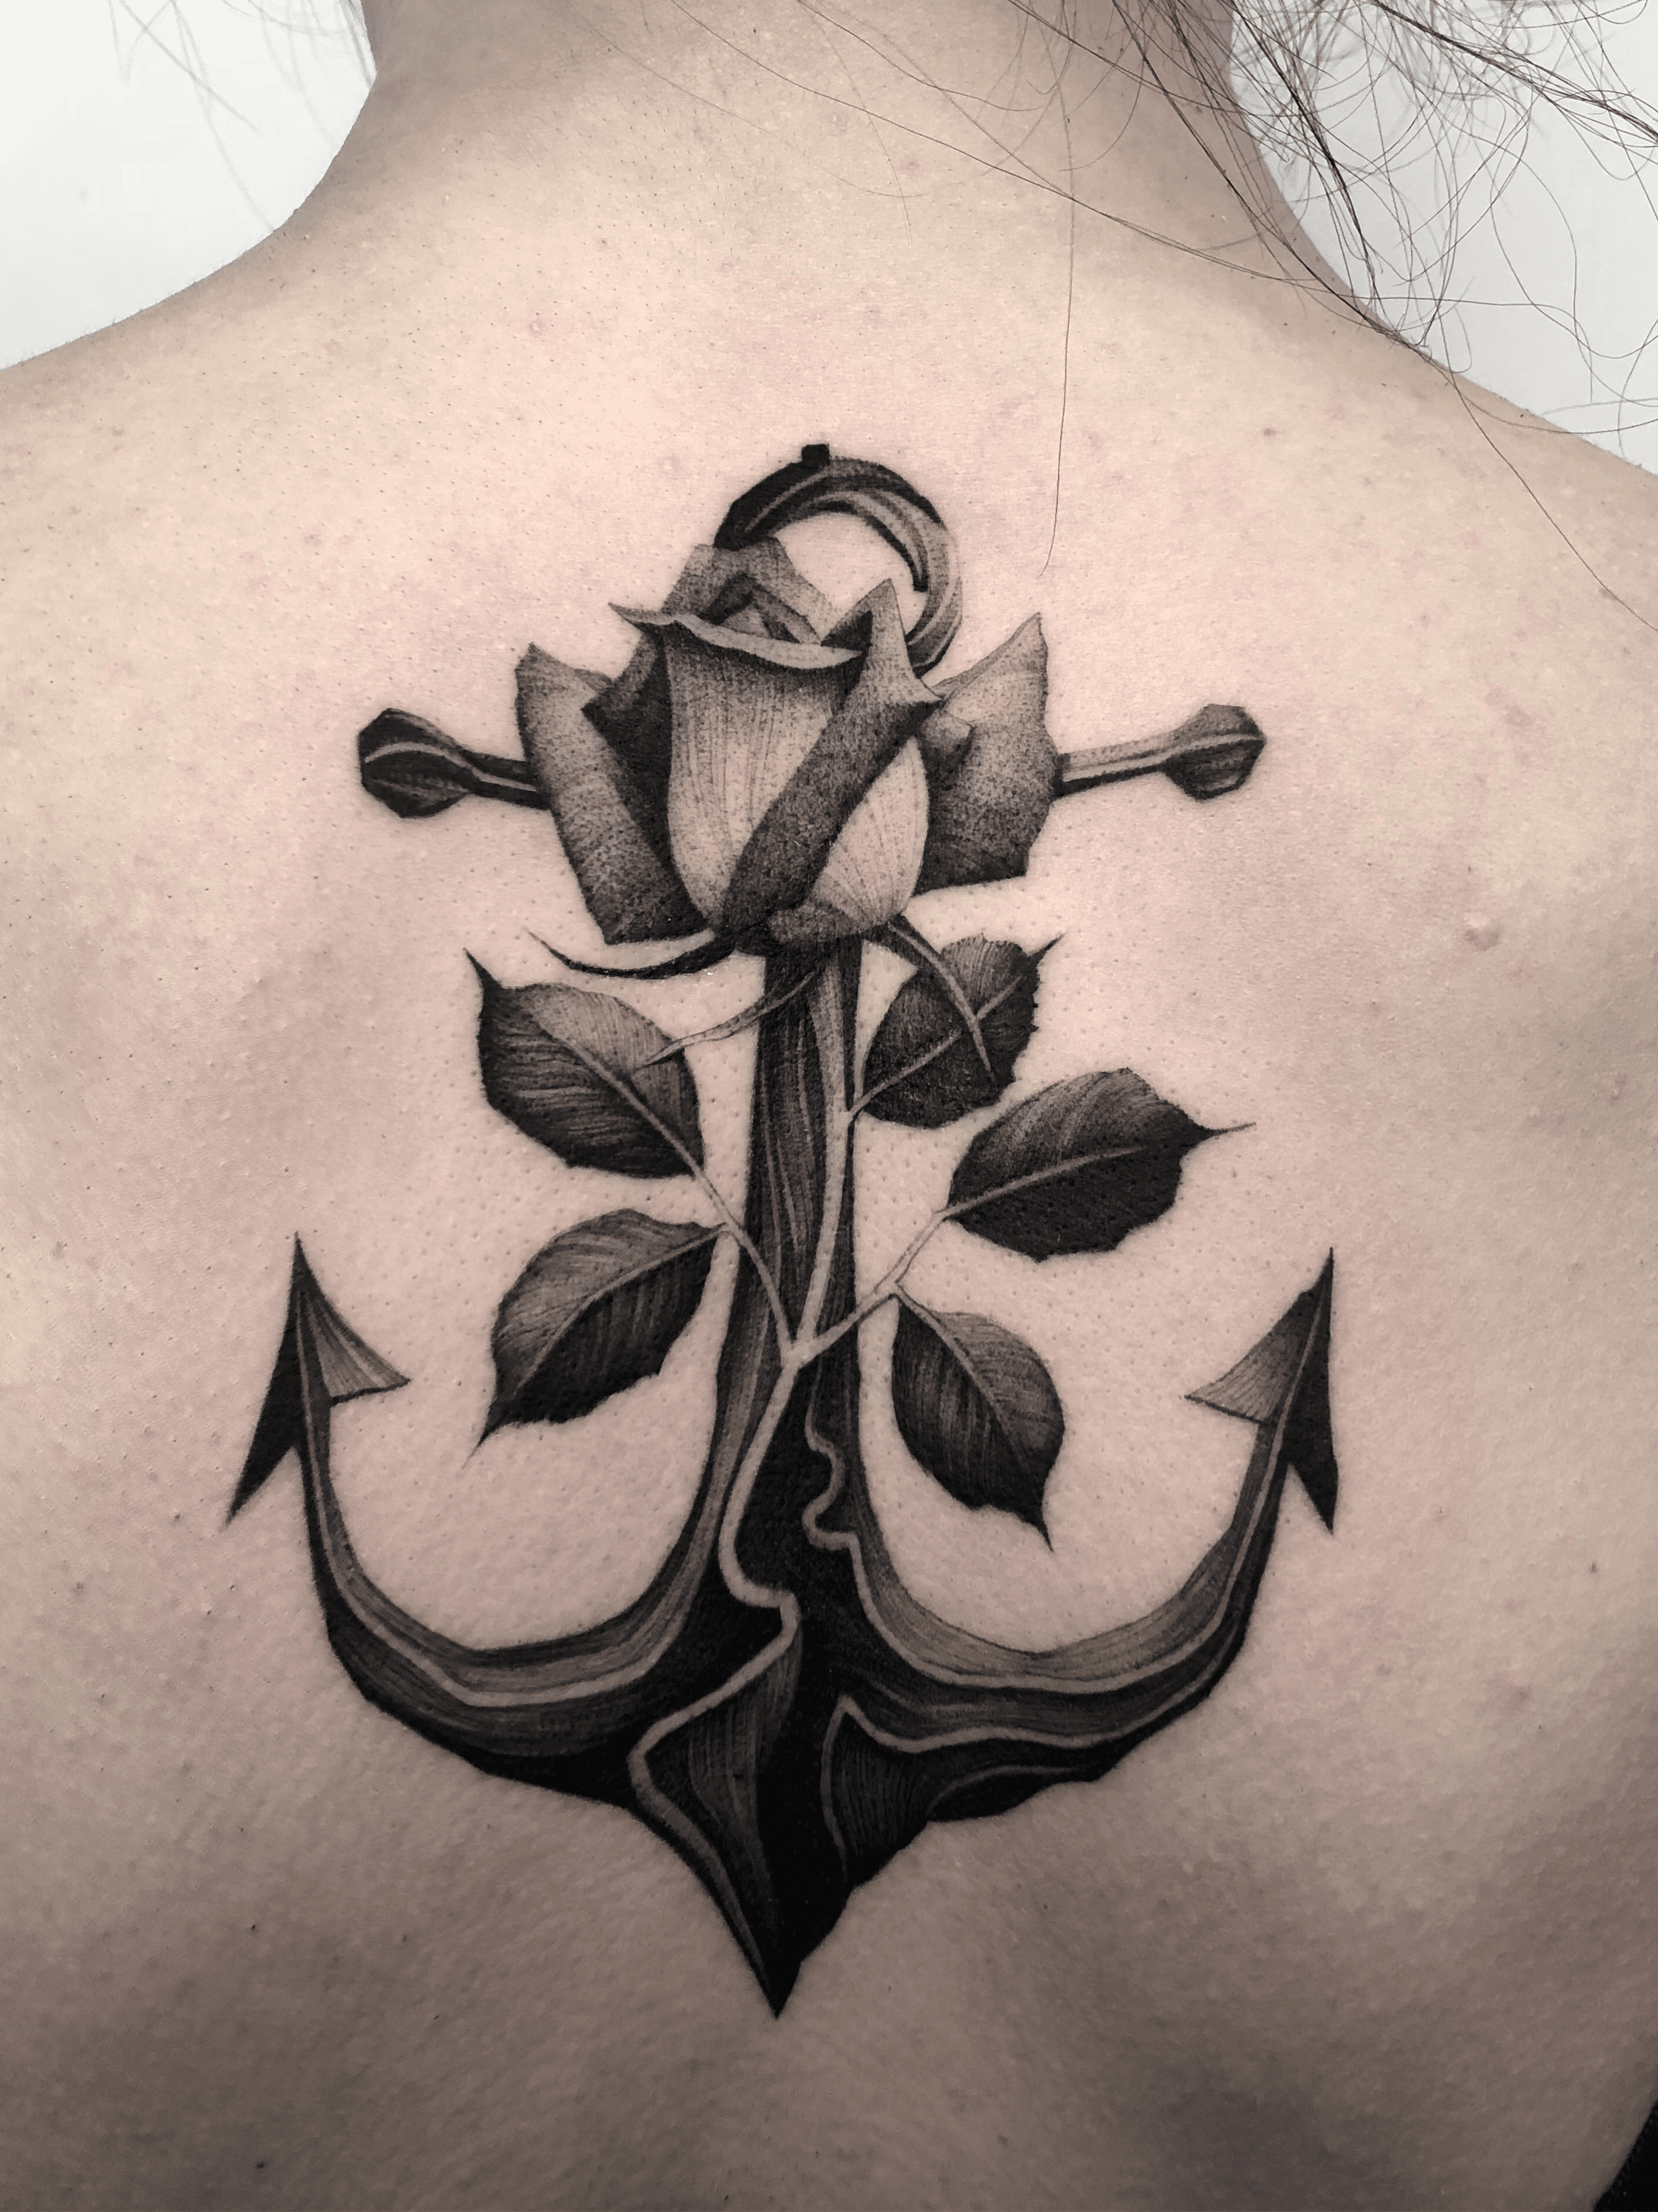 37 Captivating Anchor Tattoos Straight From The Sea  TattooBlend